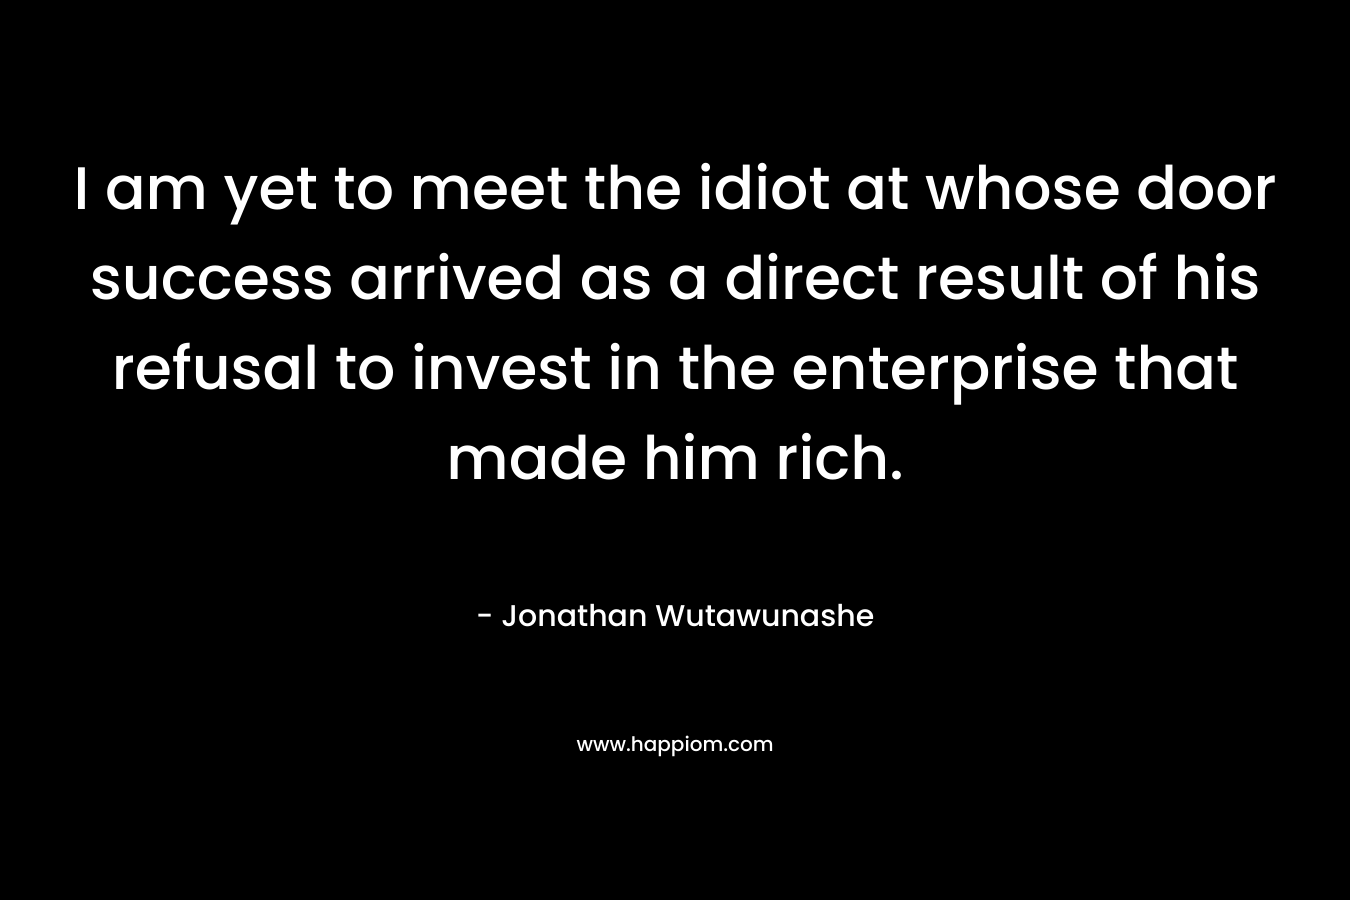 I am yet to meet the idiot at whose door success arrived as a direct result of his refusal to invest in the enterprise that made him rich.